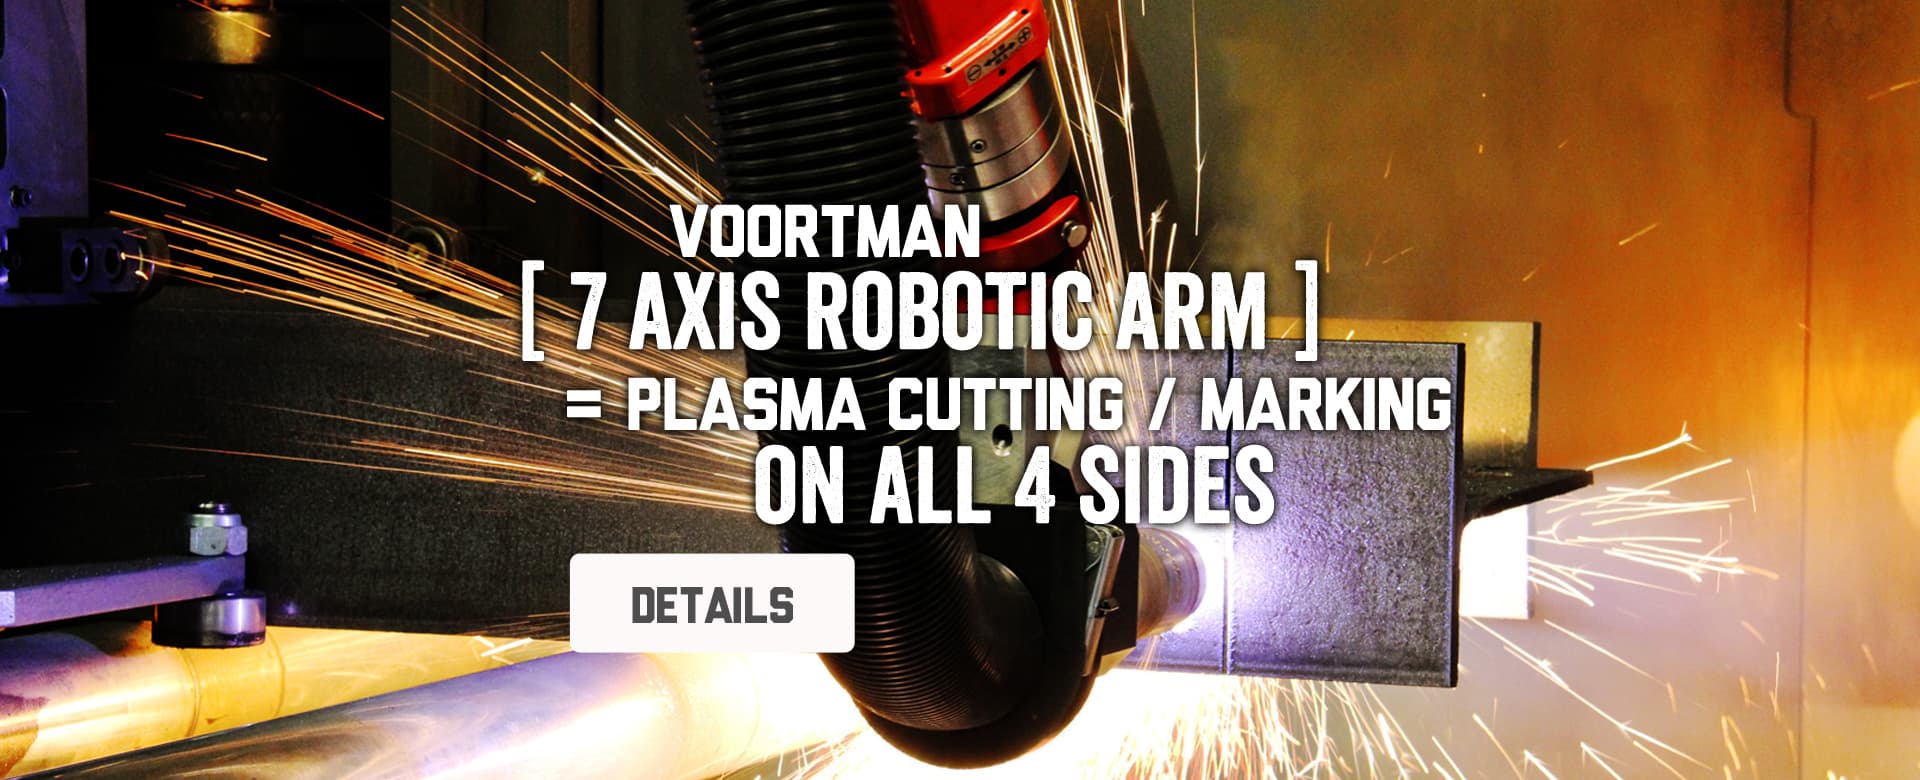 GSS Machinery offers the Voortman V807 which provides a 7 AXIS robotic arm that can cut and mark on all 4 sides